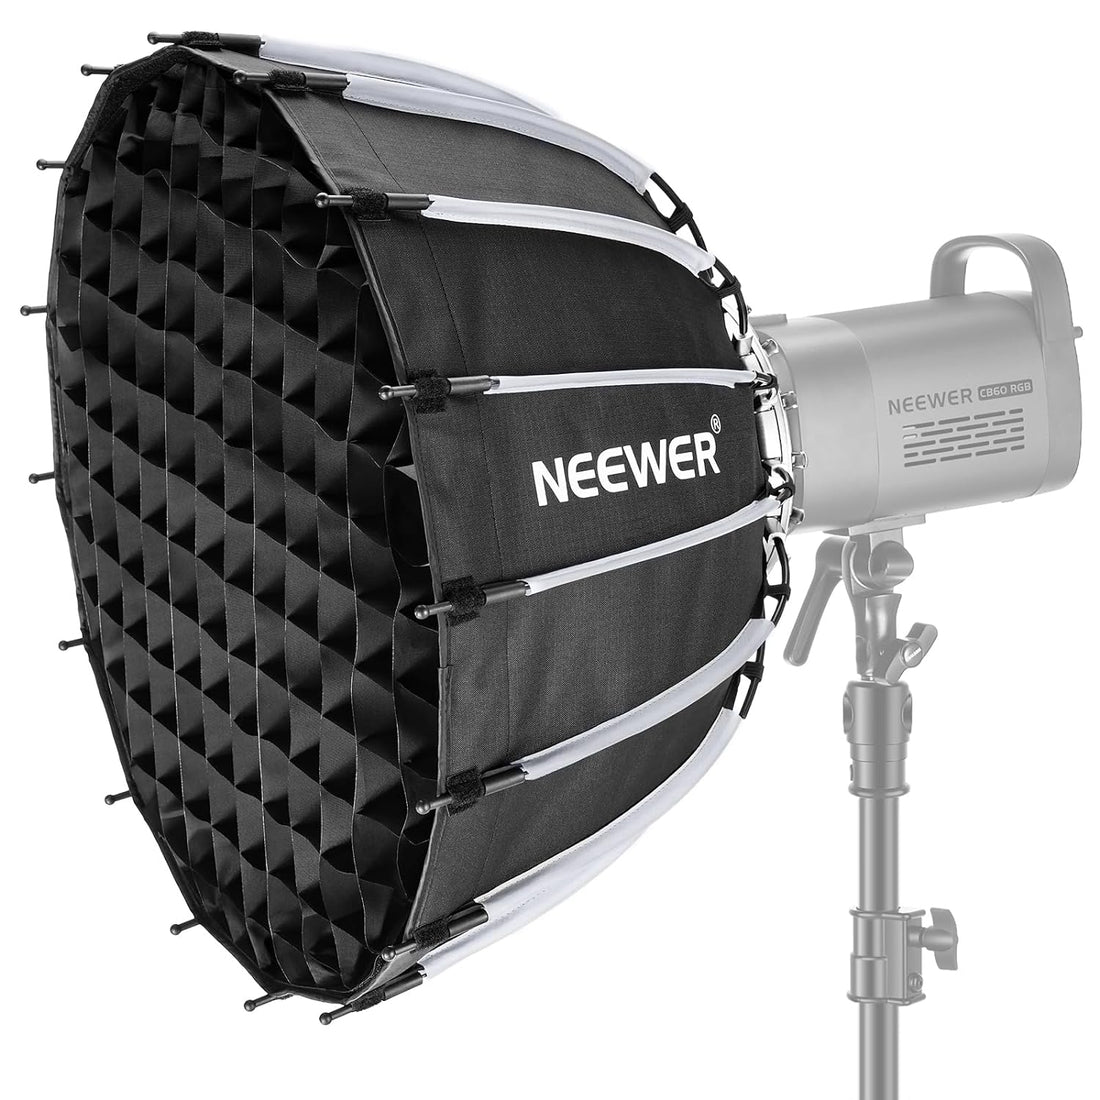 NEEWER 22inch/55cm Parabolic Softbox Quick Set up Quick Folding, with Diffusers/Honeycomb Grid/Bag, Compatible with Aputure 120d Light Dome Godox sl60w NEEWER RGB CB60 and Other Bowens Mount Lights